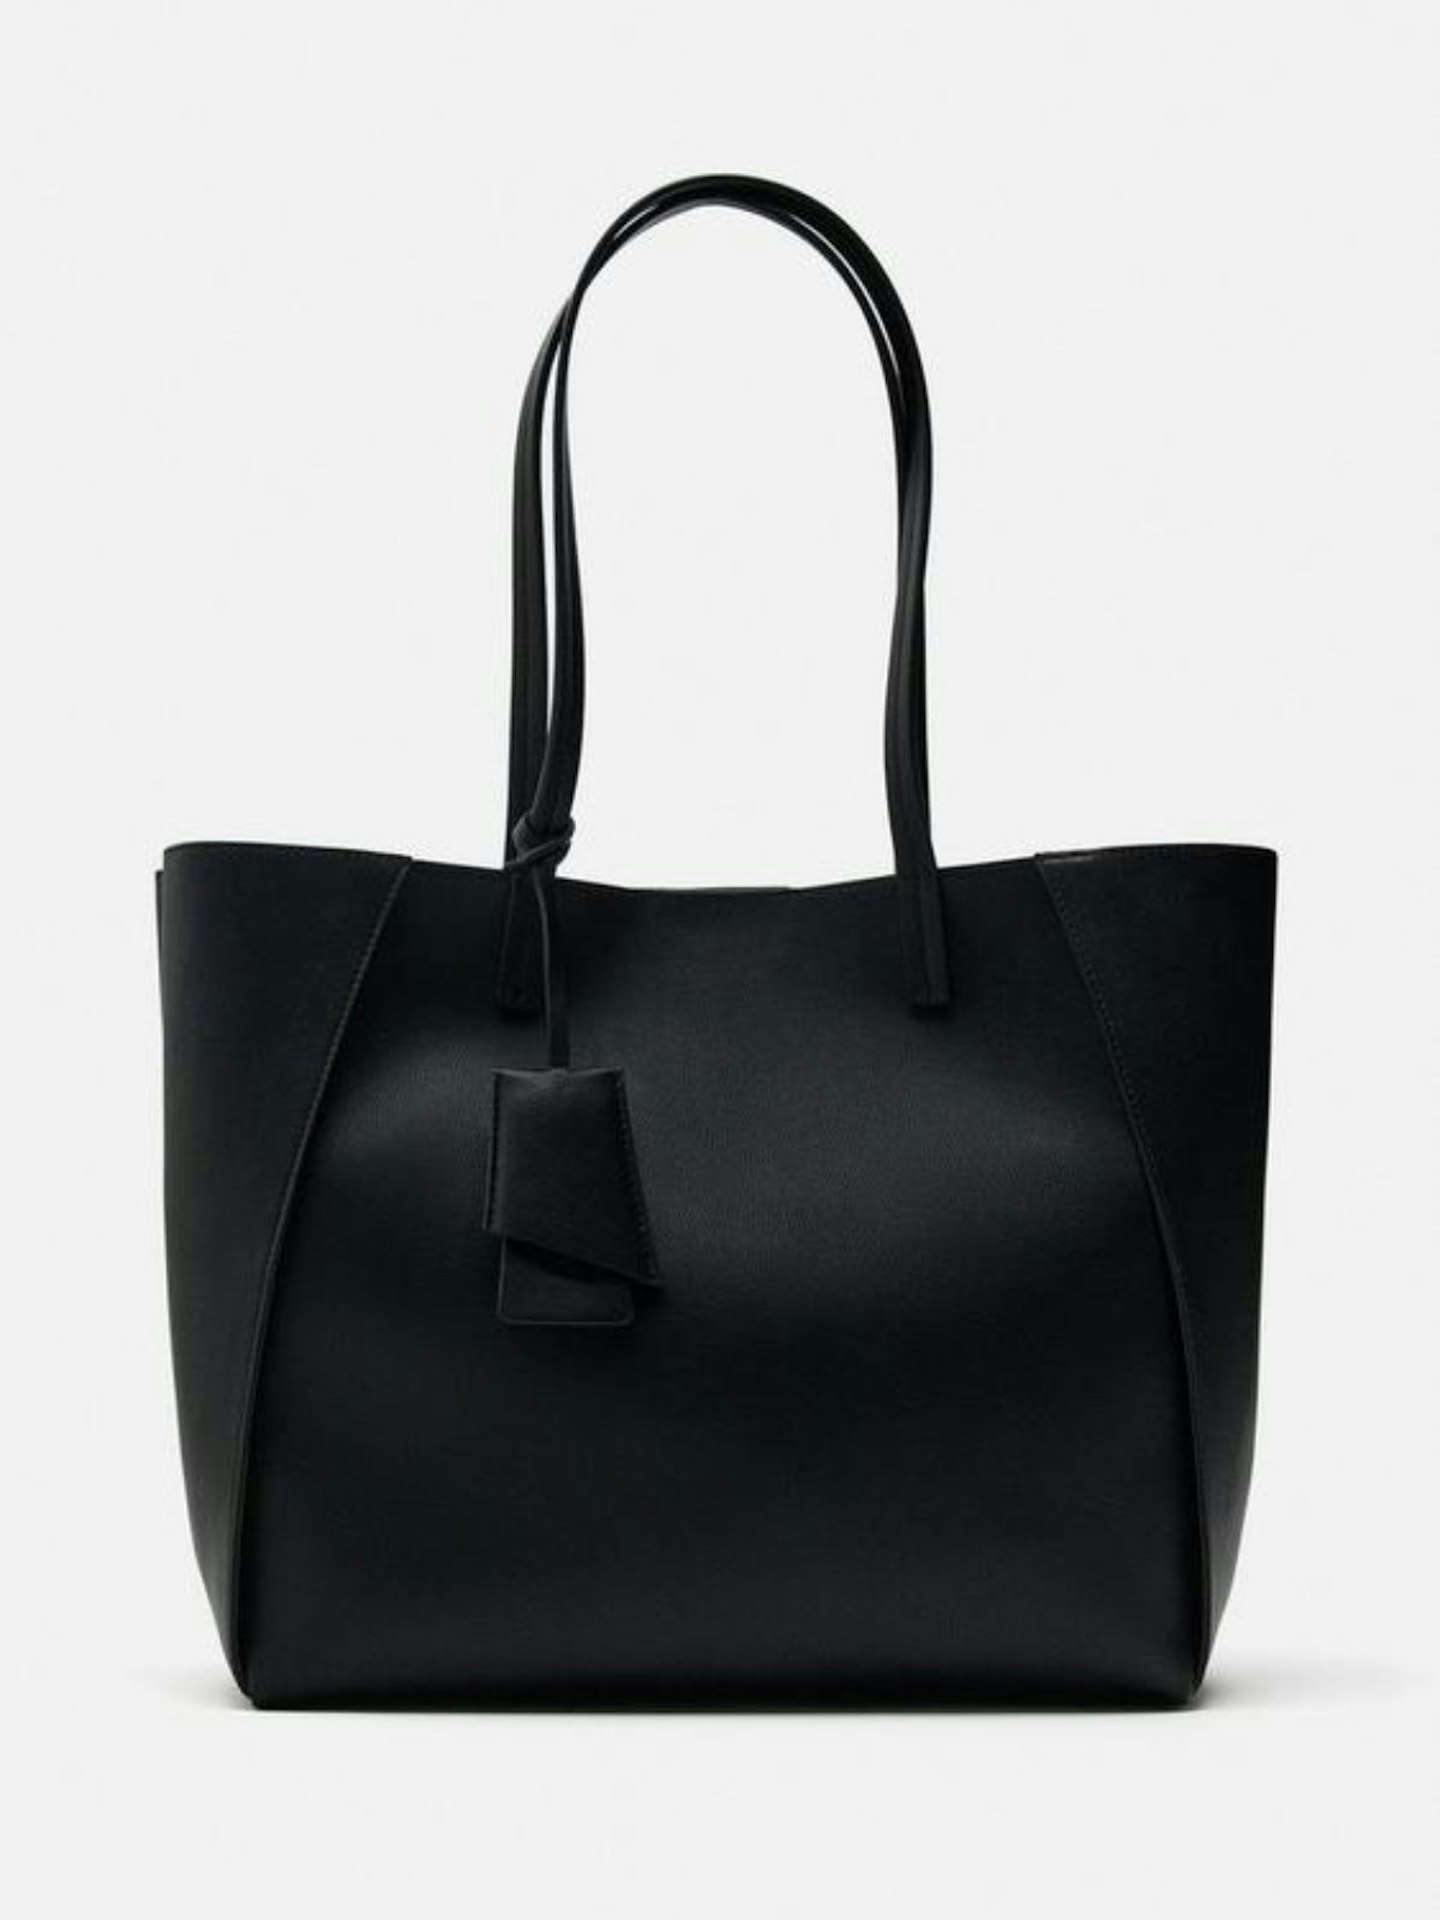 Zara, Tote Bag With Compartments